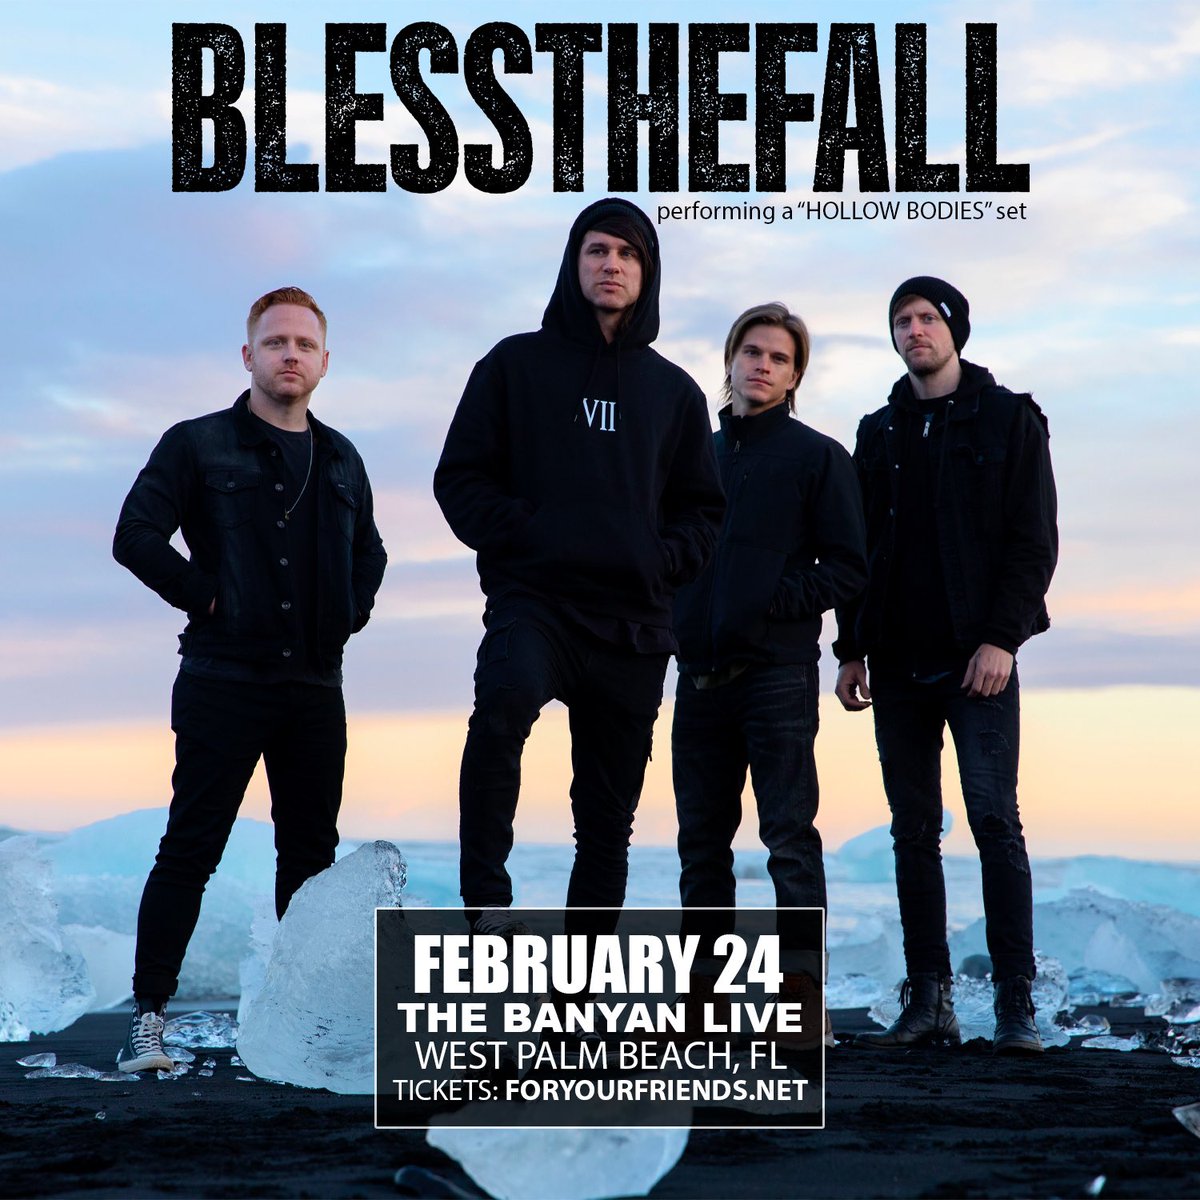 We’re bringing Hollow Bodies to The Banyan Live in West Palm Beach on Feb 24. Tickets & VIP available now at blessthefallmusic.com